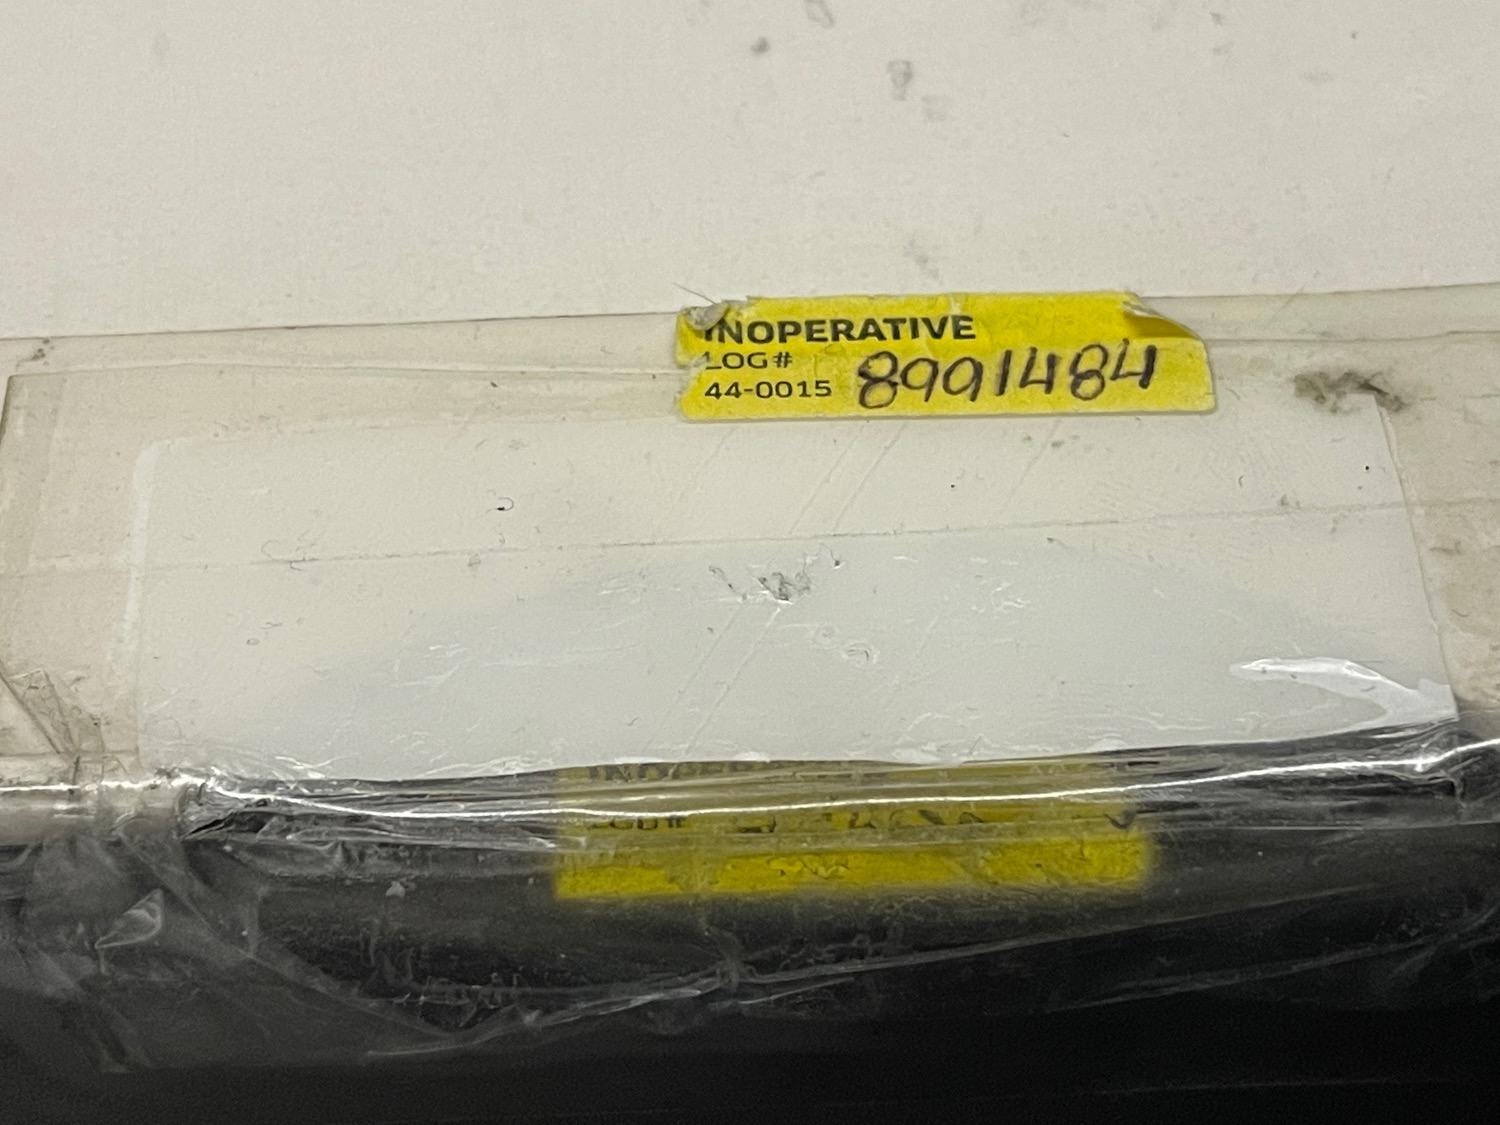 a plastic wrap with a yellow label